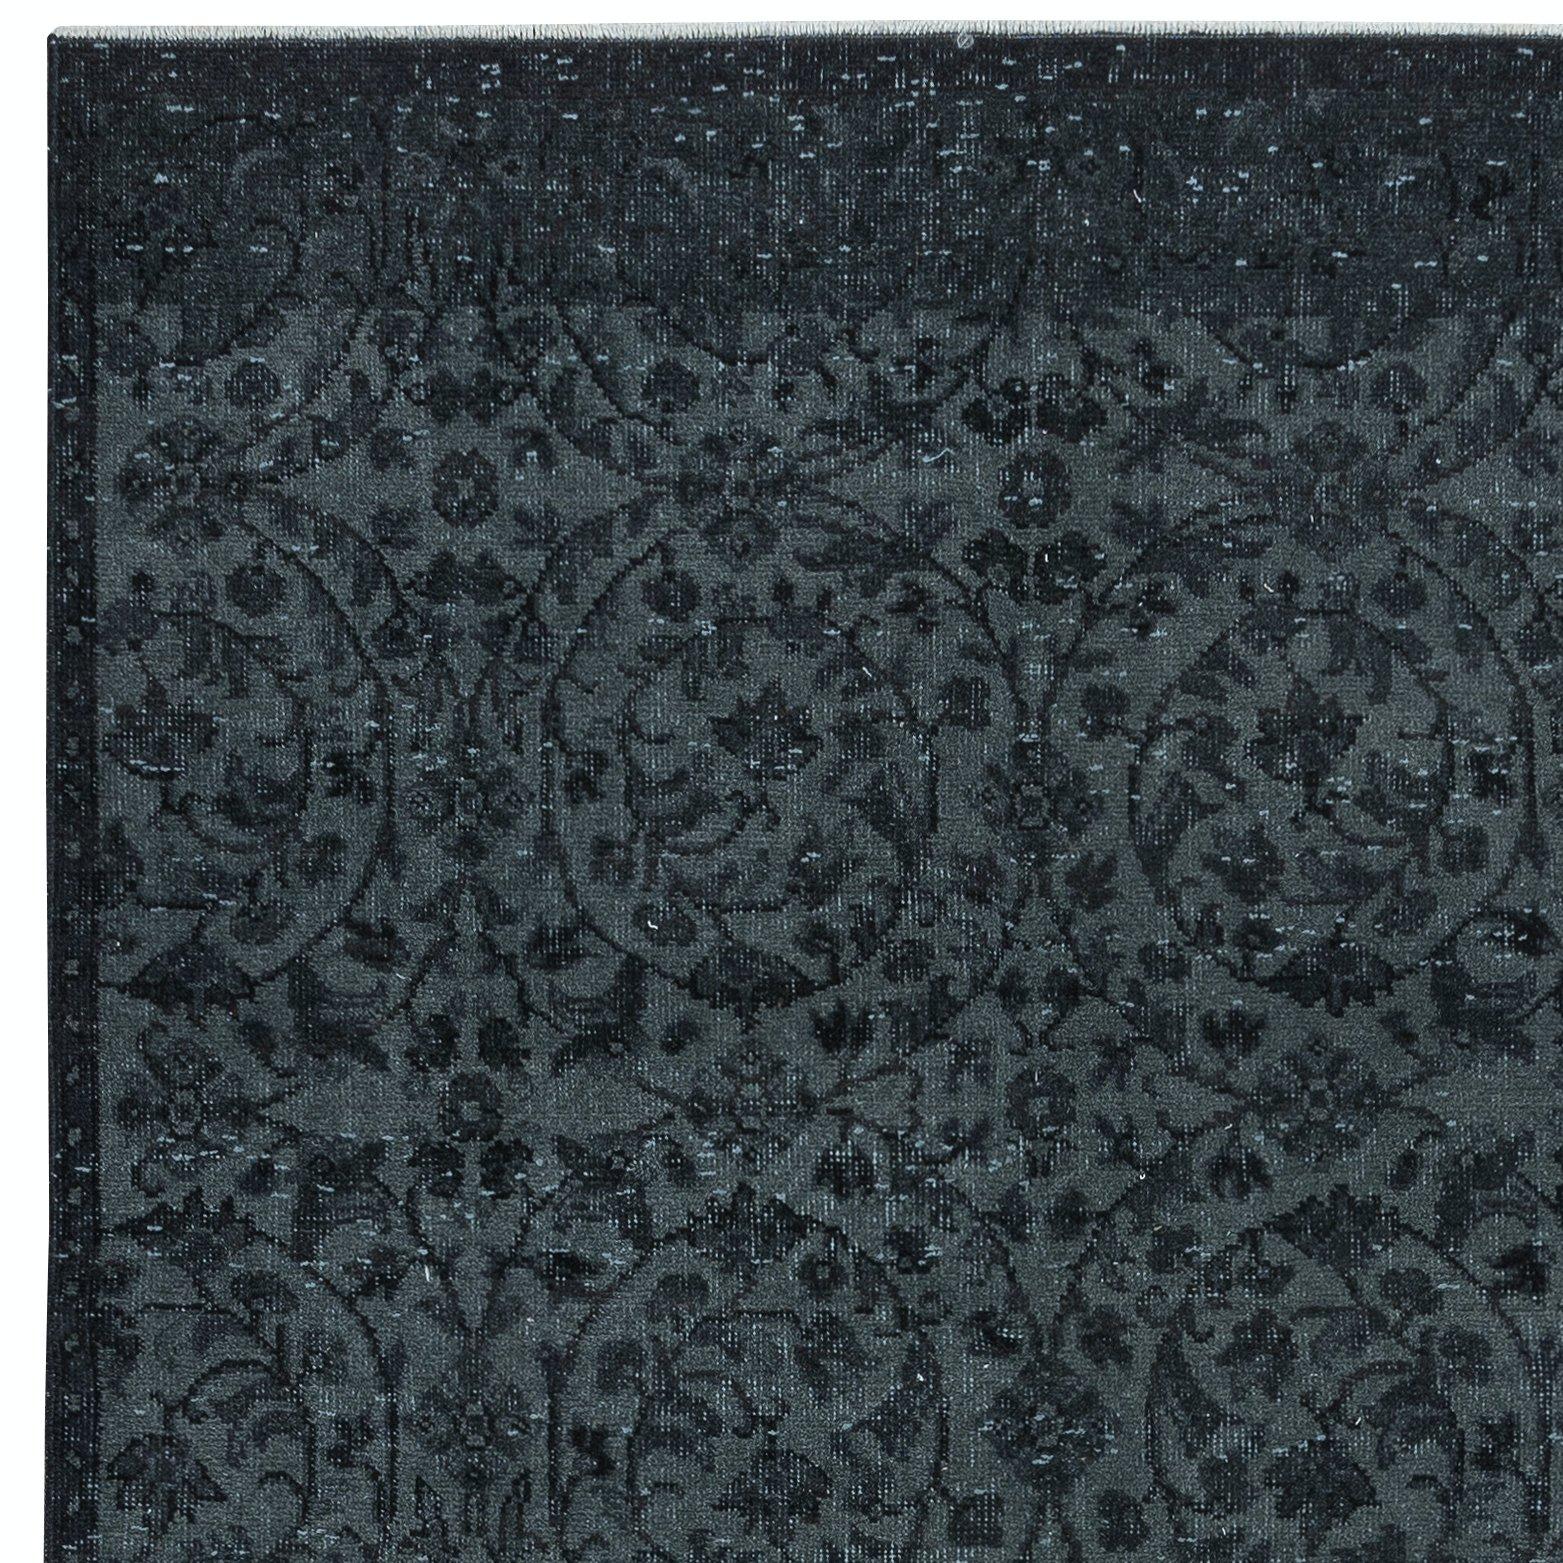 Turkish 4.7x8.8 Ft Floral Area Rug in Black & Gray, Handknotted and Handwoven in Turkey For Sale